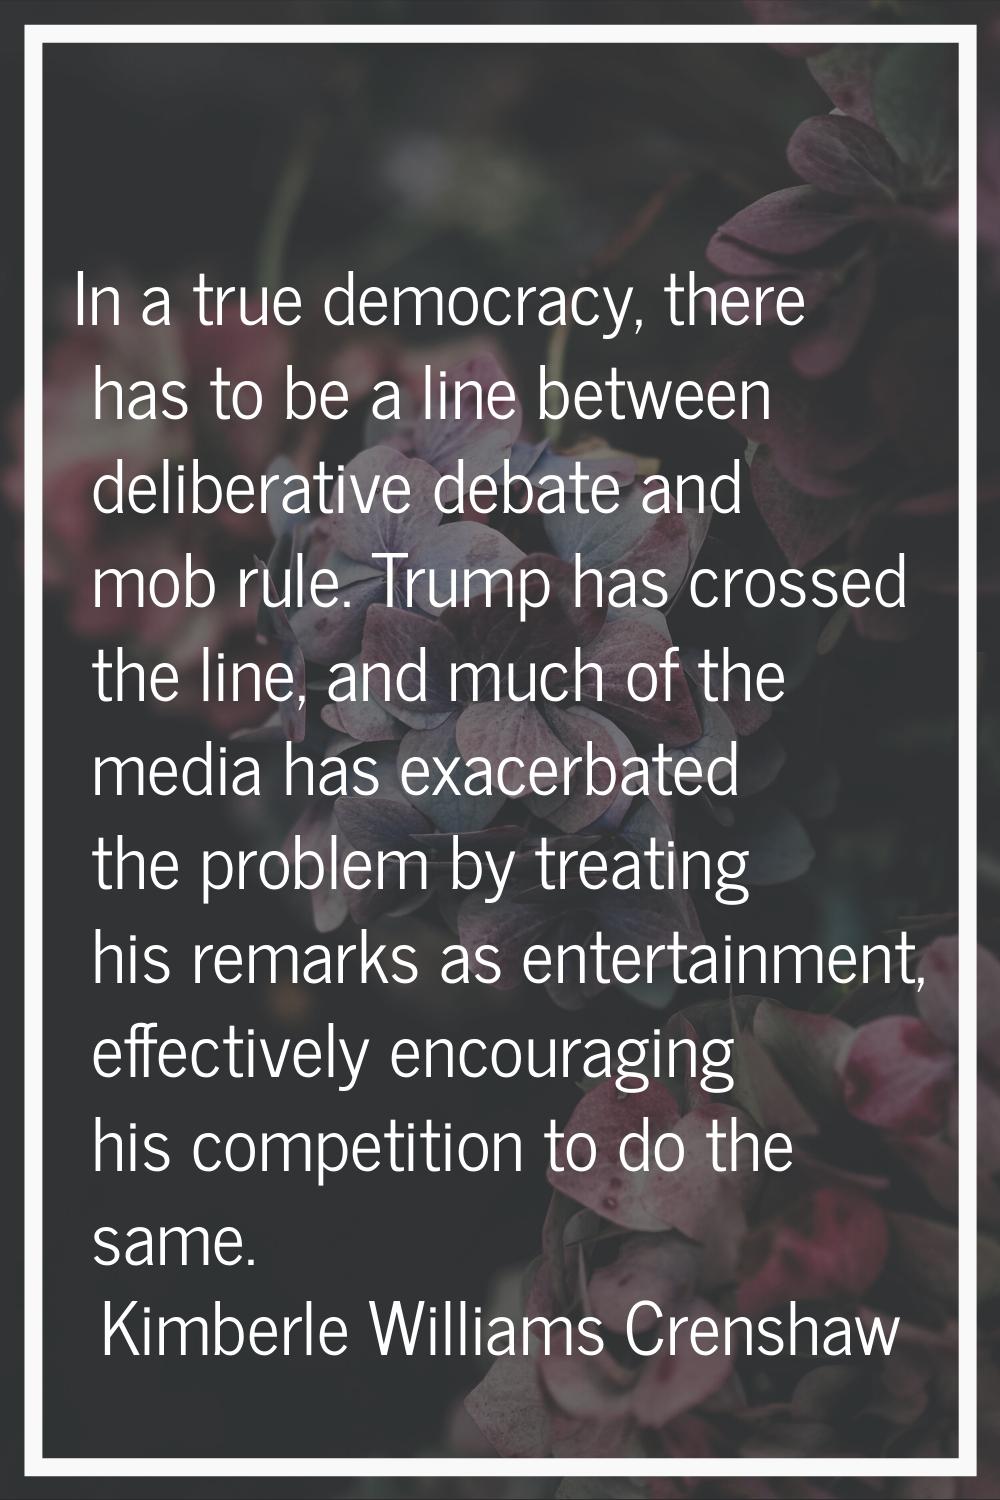 In a true democracy, there has to be a line between deliberative debate and mob rule. Trump has cro